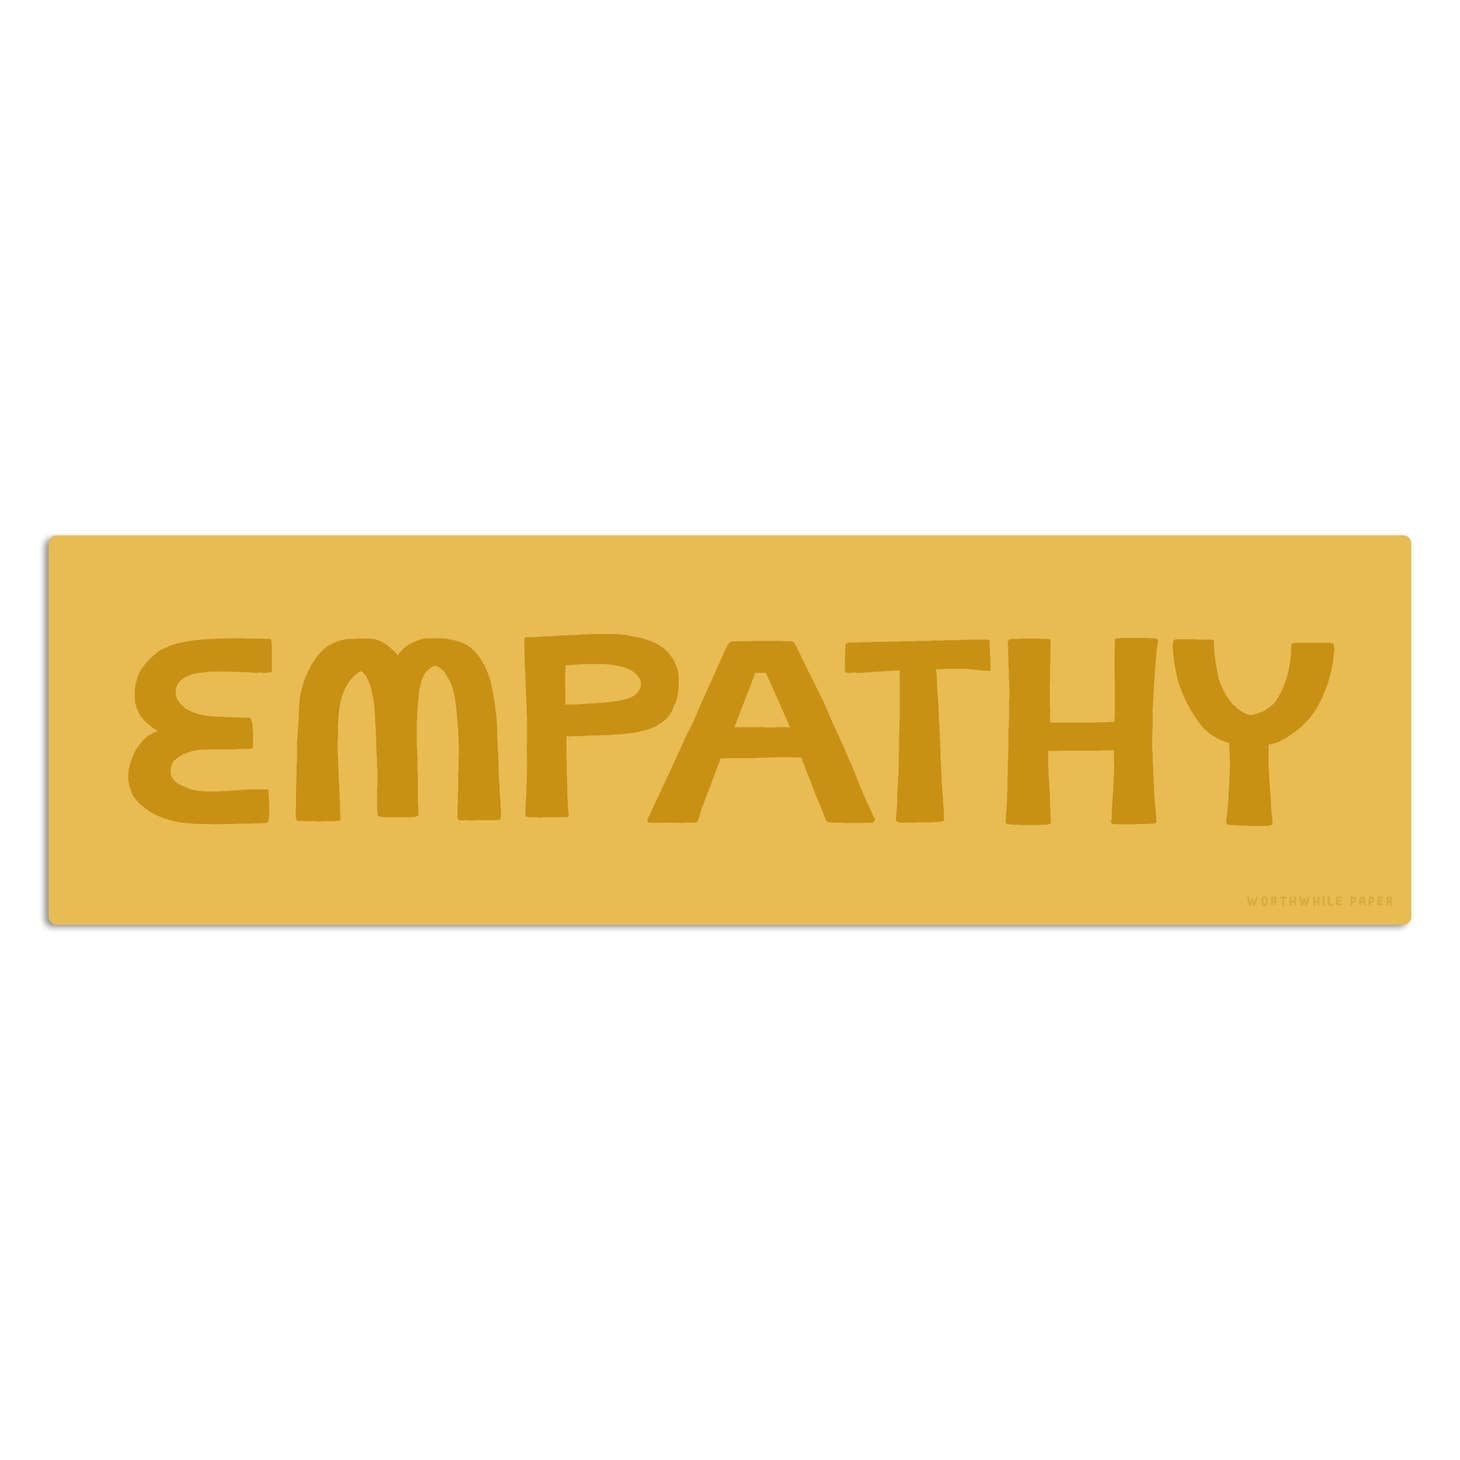 Appreciate the magic of empathy!   This durable vinyl sticker reminds us to practice being empathetic and understanding with others.